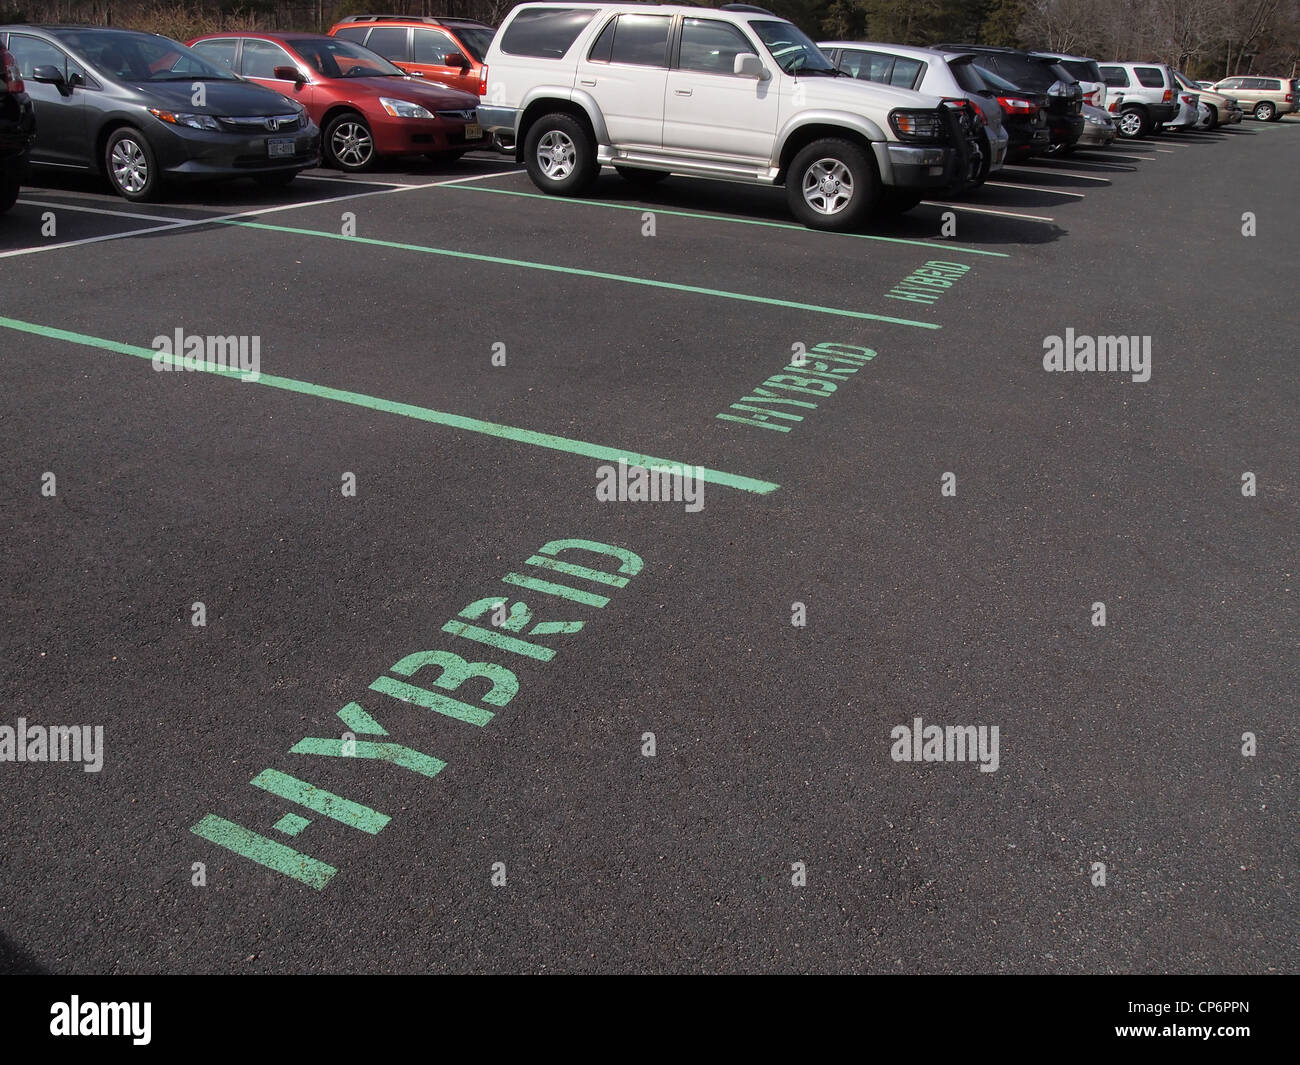 Parking spaces reserved for hybrid vehicles, New York, United States, March 8, 2012, © Katharine Andriotis Stock Photo